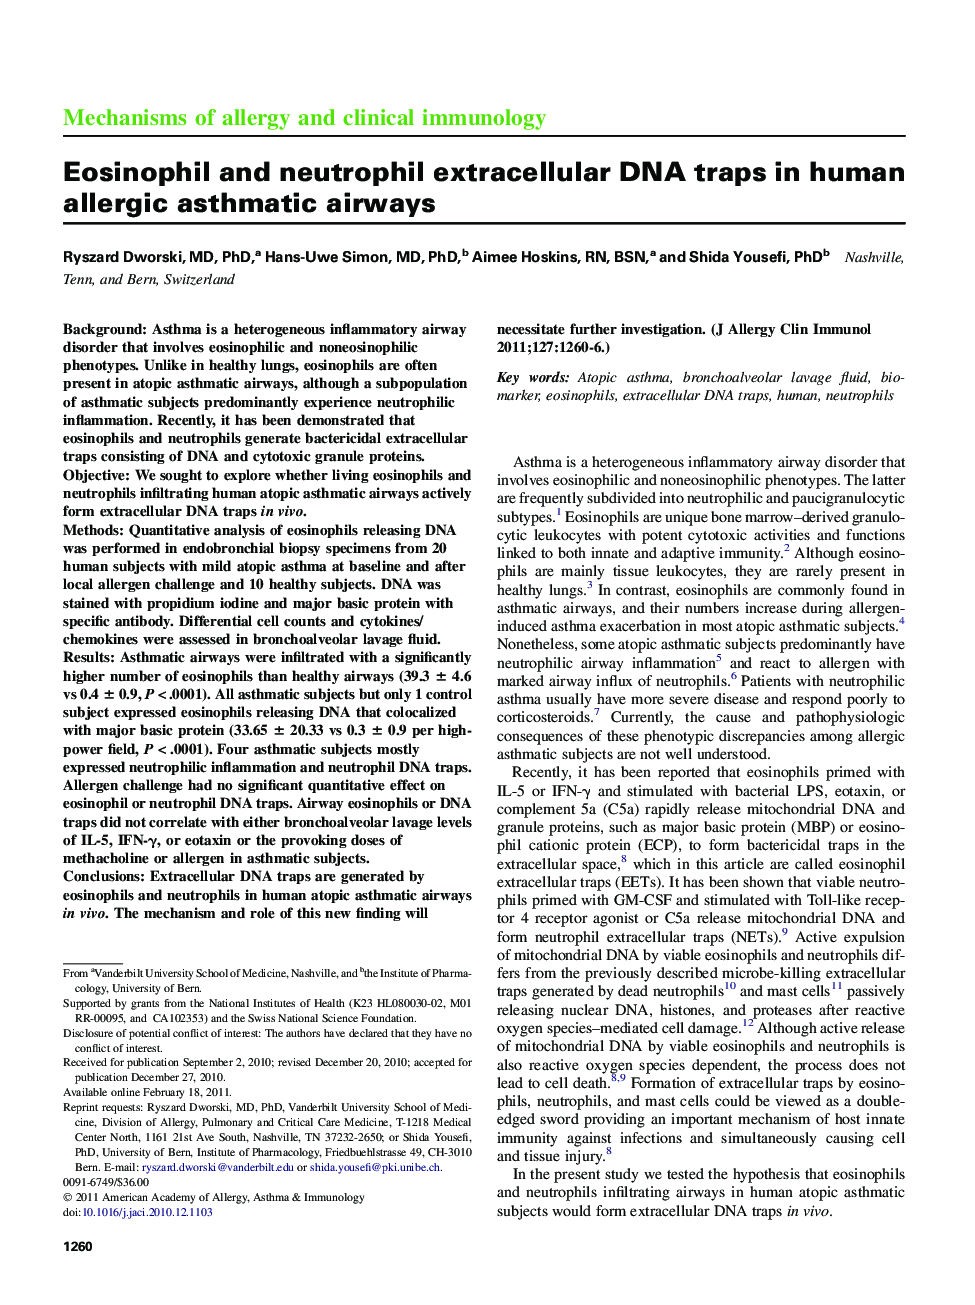 Eosinophil and neutrophil extracellular DNA traps in human allergic asthmatic airways 